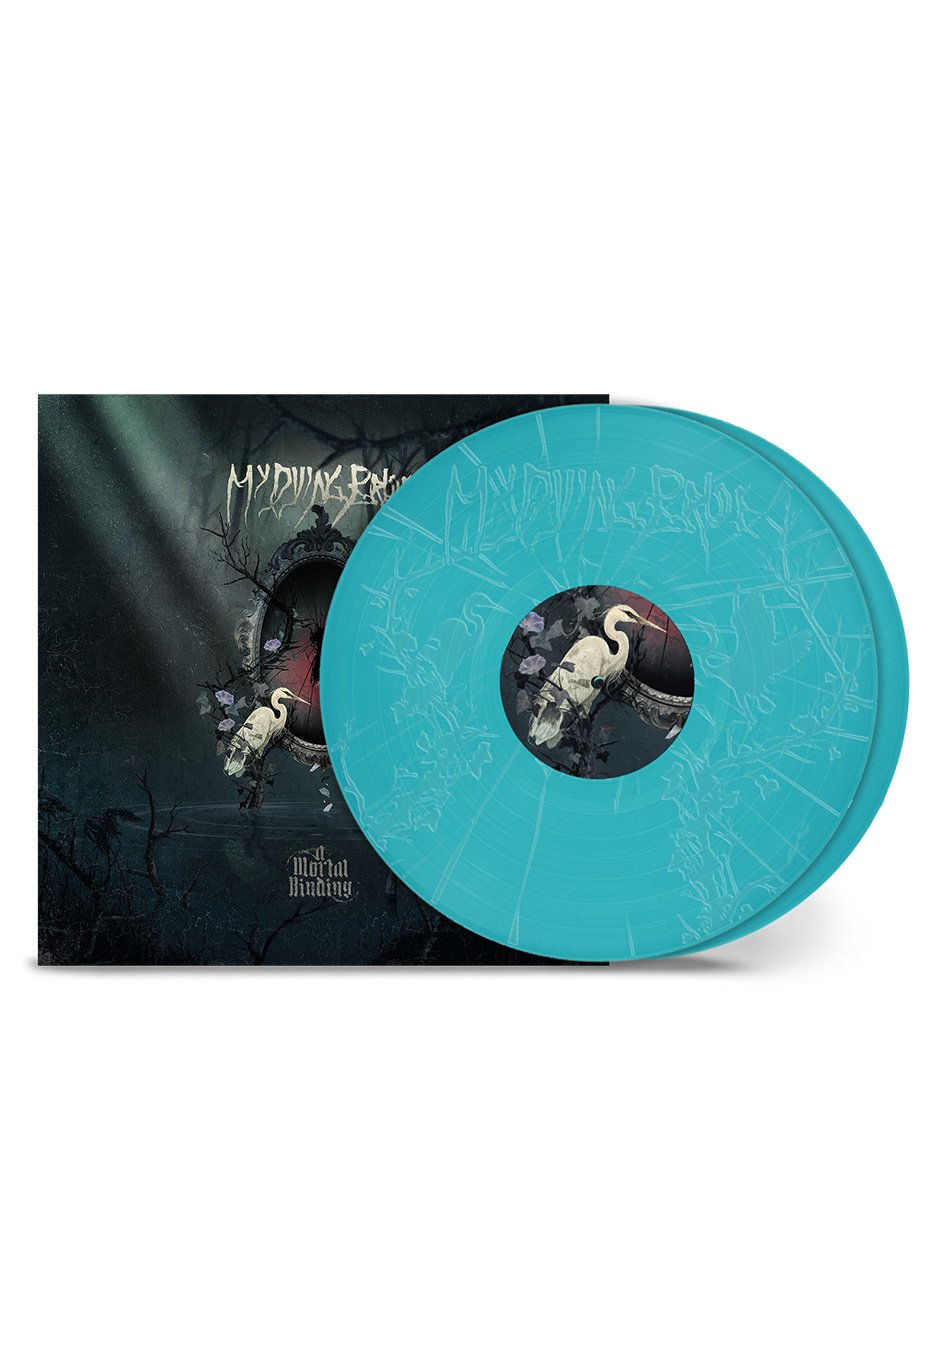 My Dying Bride - A Mortal Binding Green - Colored 2 Vinyl